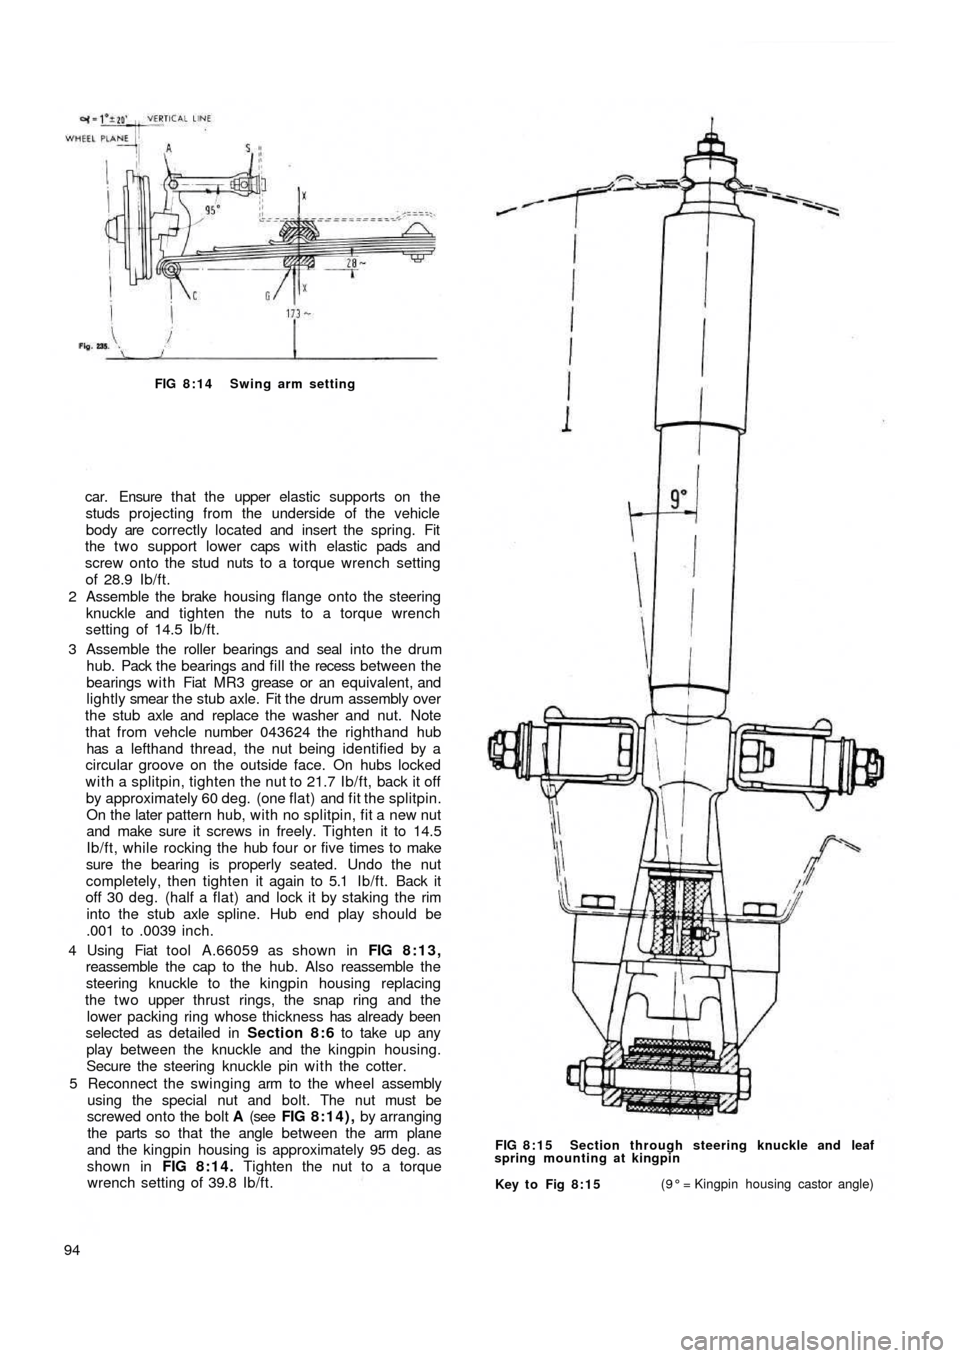 FIAT 500 1964 1.G Workshop Manual FIG 8:14 Swing arm setting
car. Ensure t h a t the  upper elastic supports on the
studs projecting from the underside of the vehicle
body are correctly located and insert the spring. Fit
the two suppo